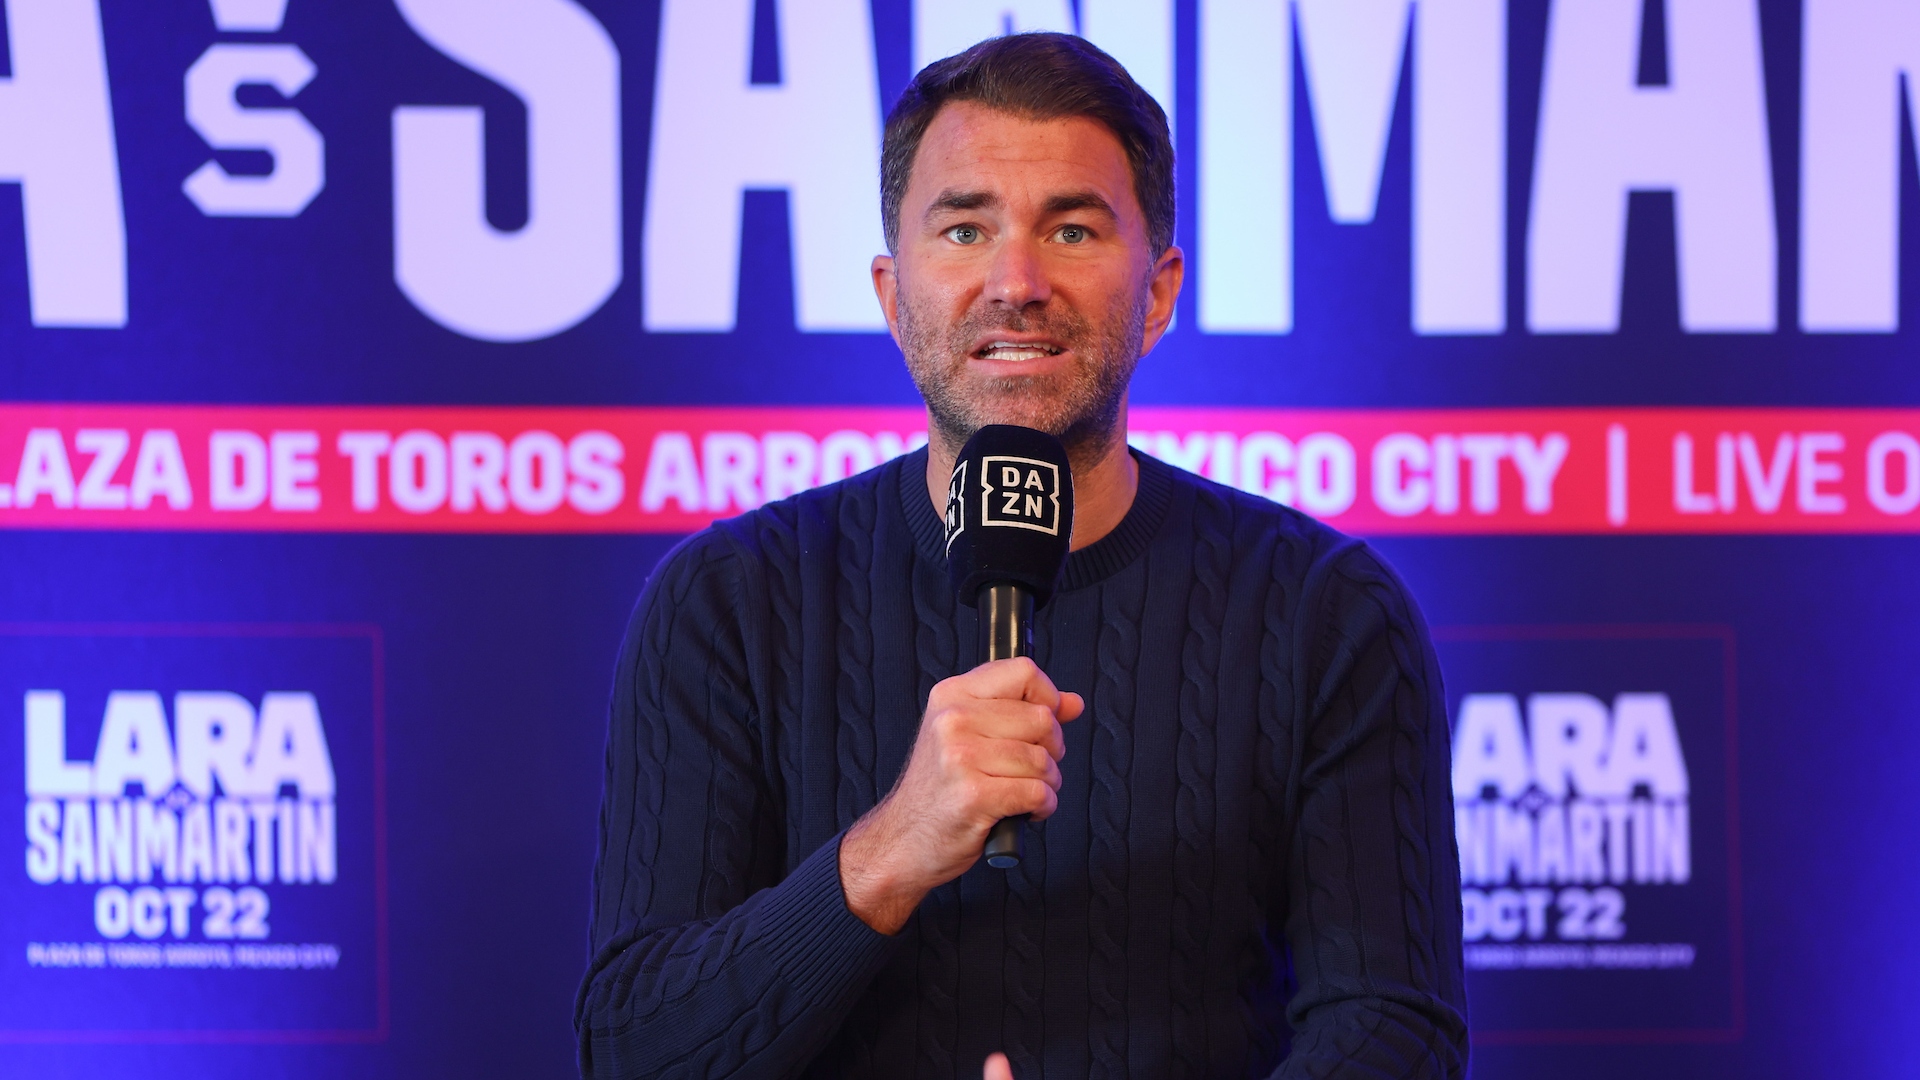 Eddie Hearn reveals plans for new major boxing event in the UK